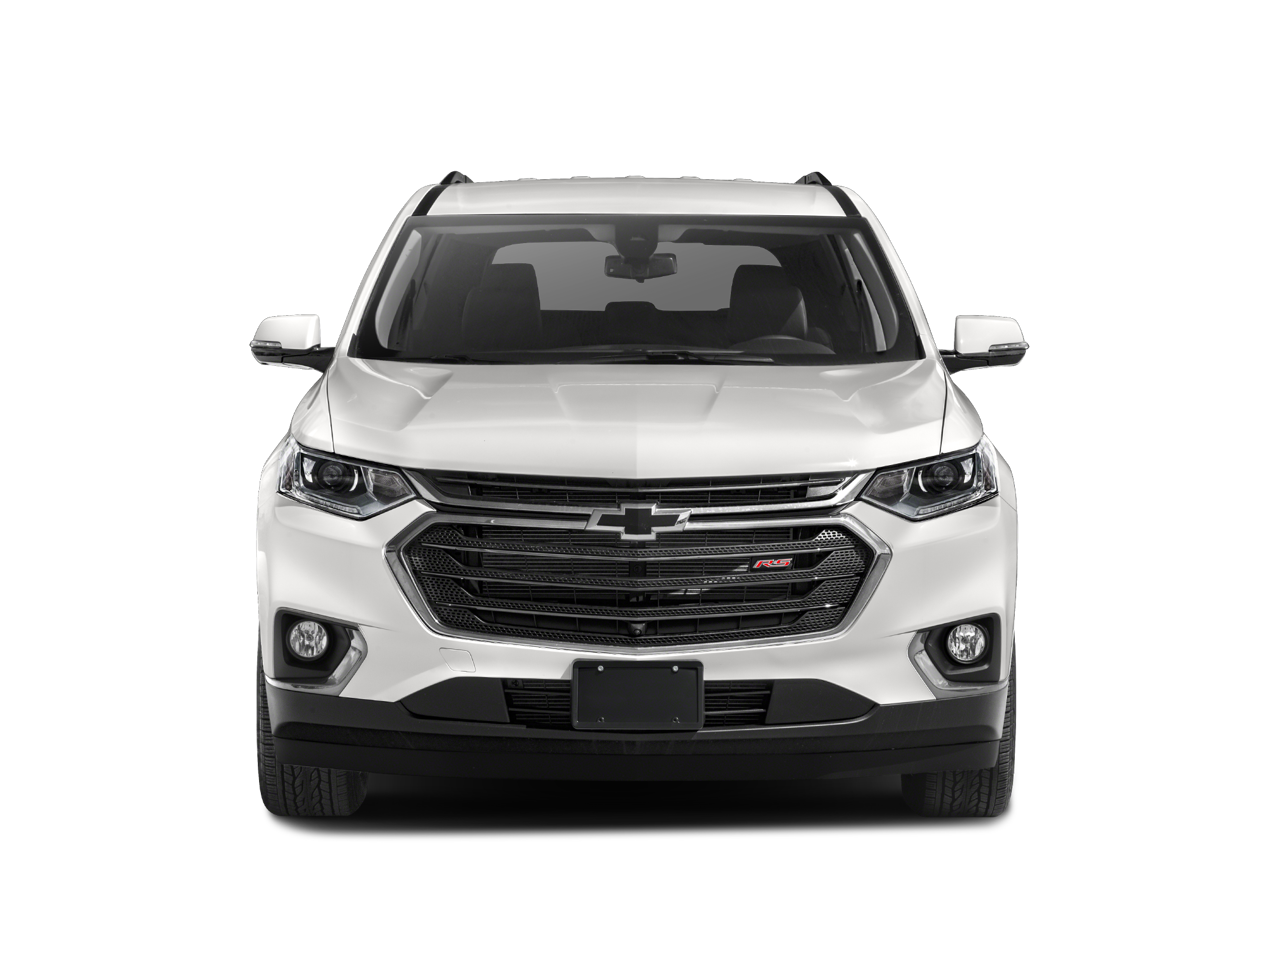 2021 Chevrolet Traverse RS Navigation System Dual SkyScape 2-Panel Power Sunr